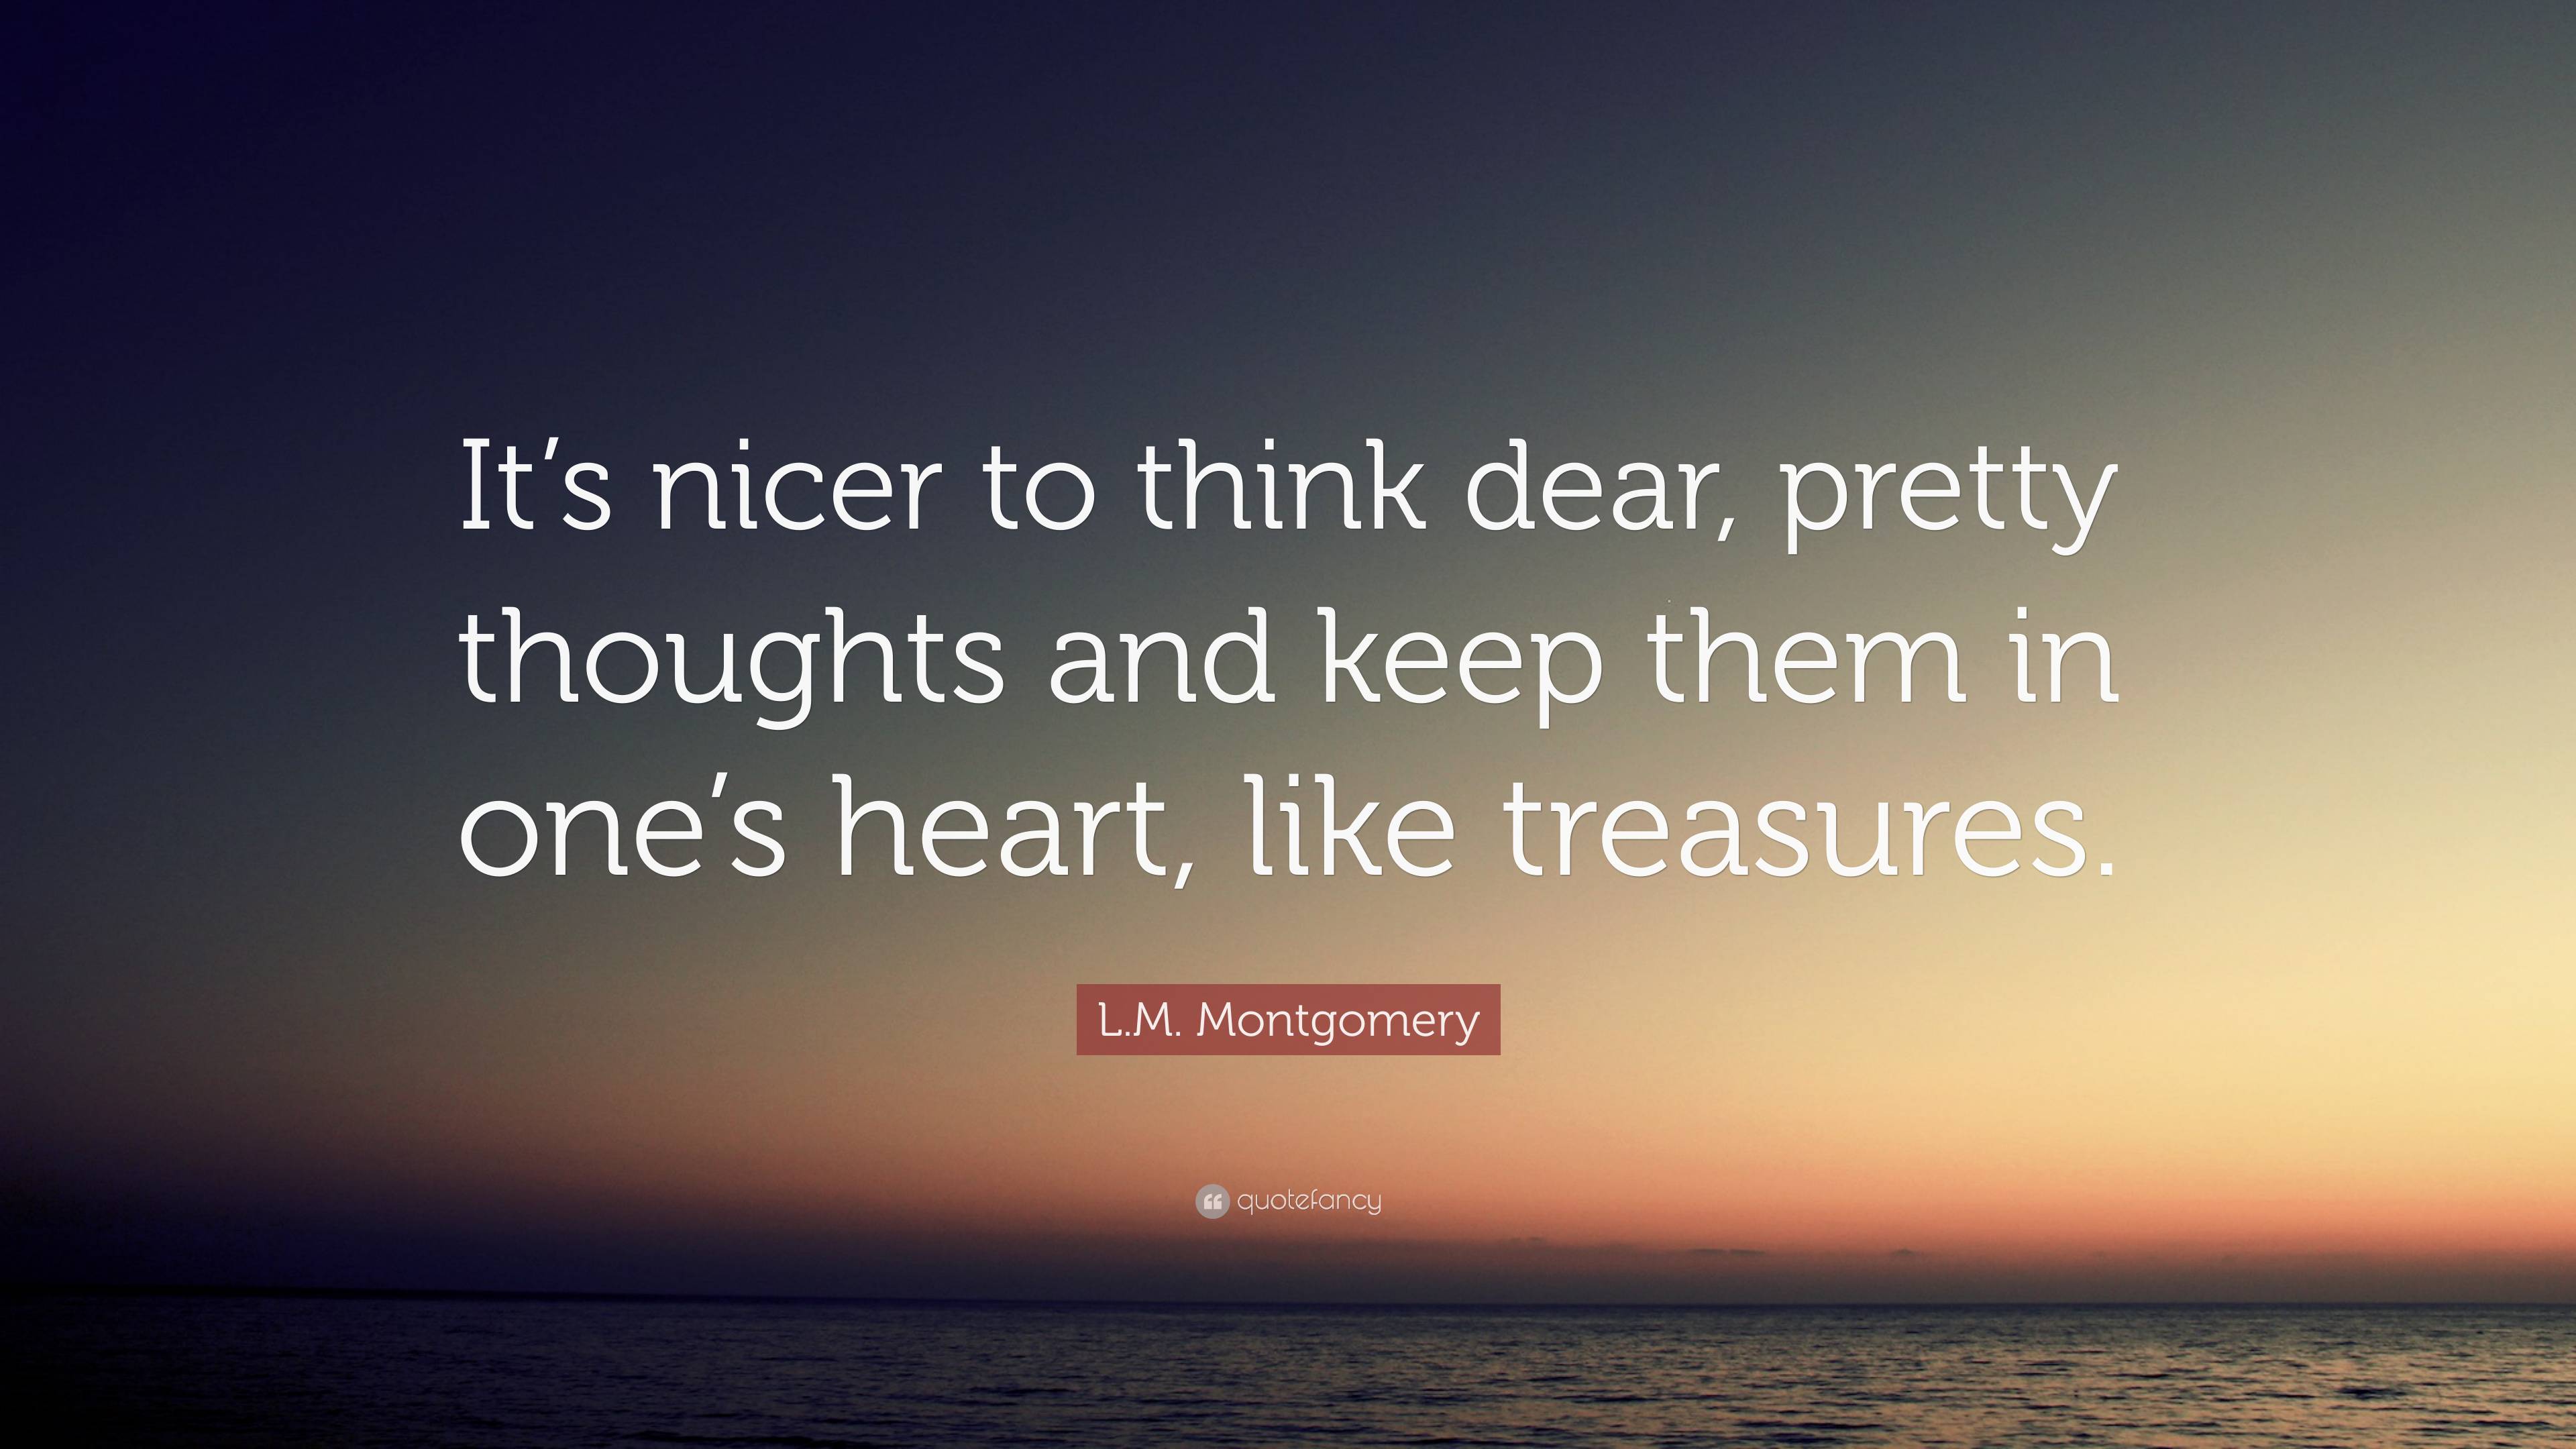 L.M. Montgomery Quote: “It’s nicer to think dear, pretty thoughts and ...